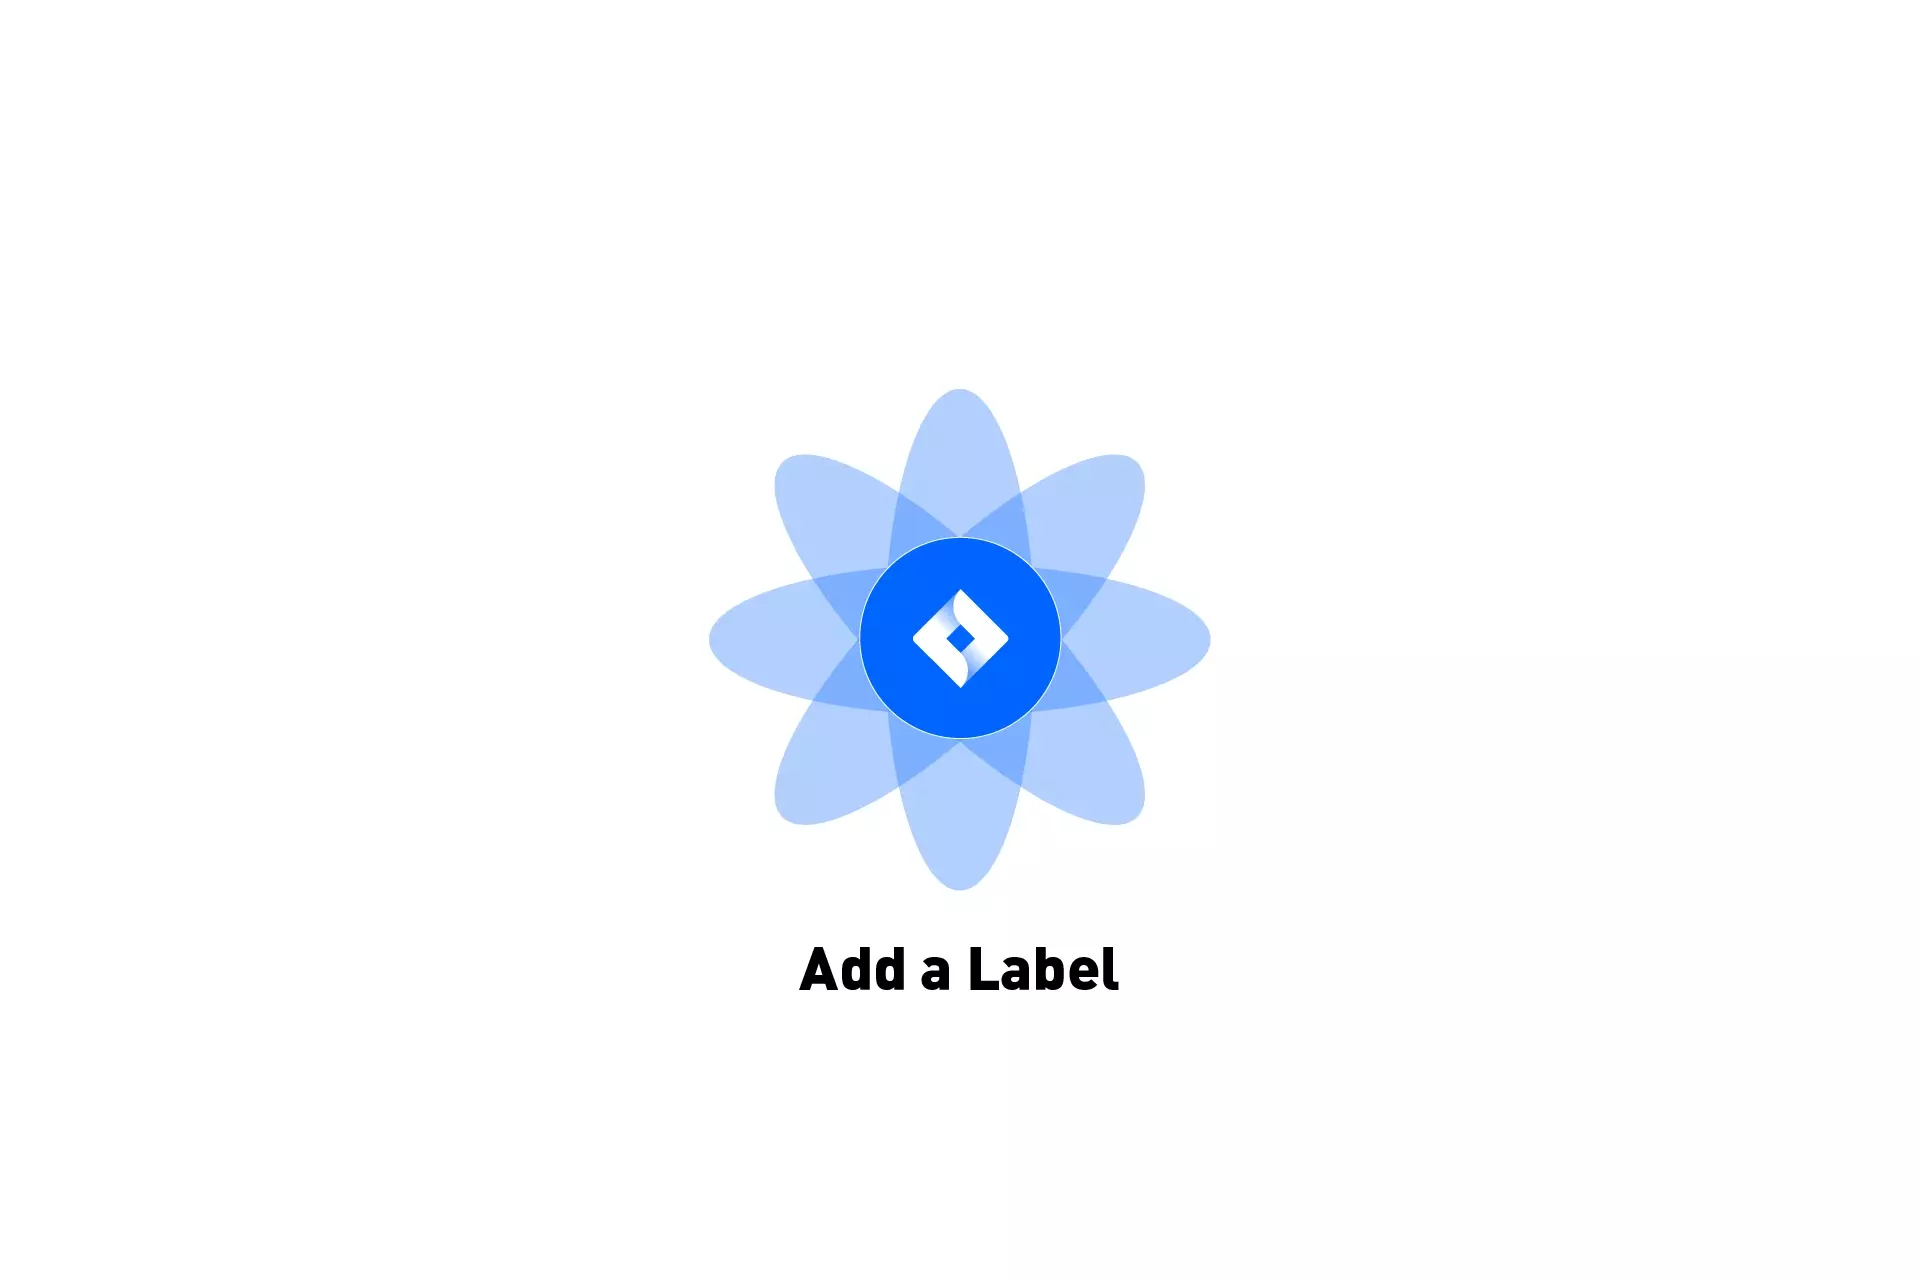 A flower that represents JIRA with the text "Add a label" beneath it.